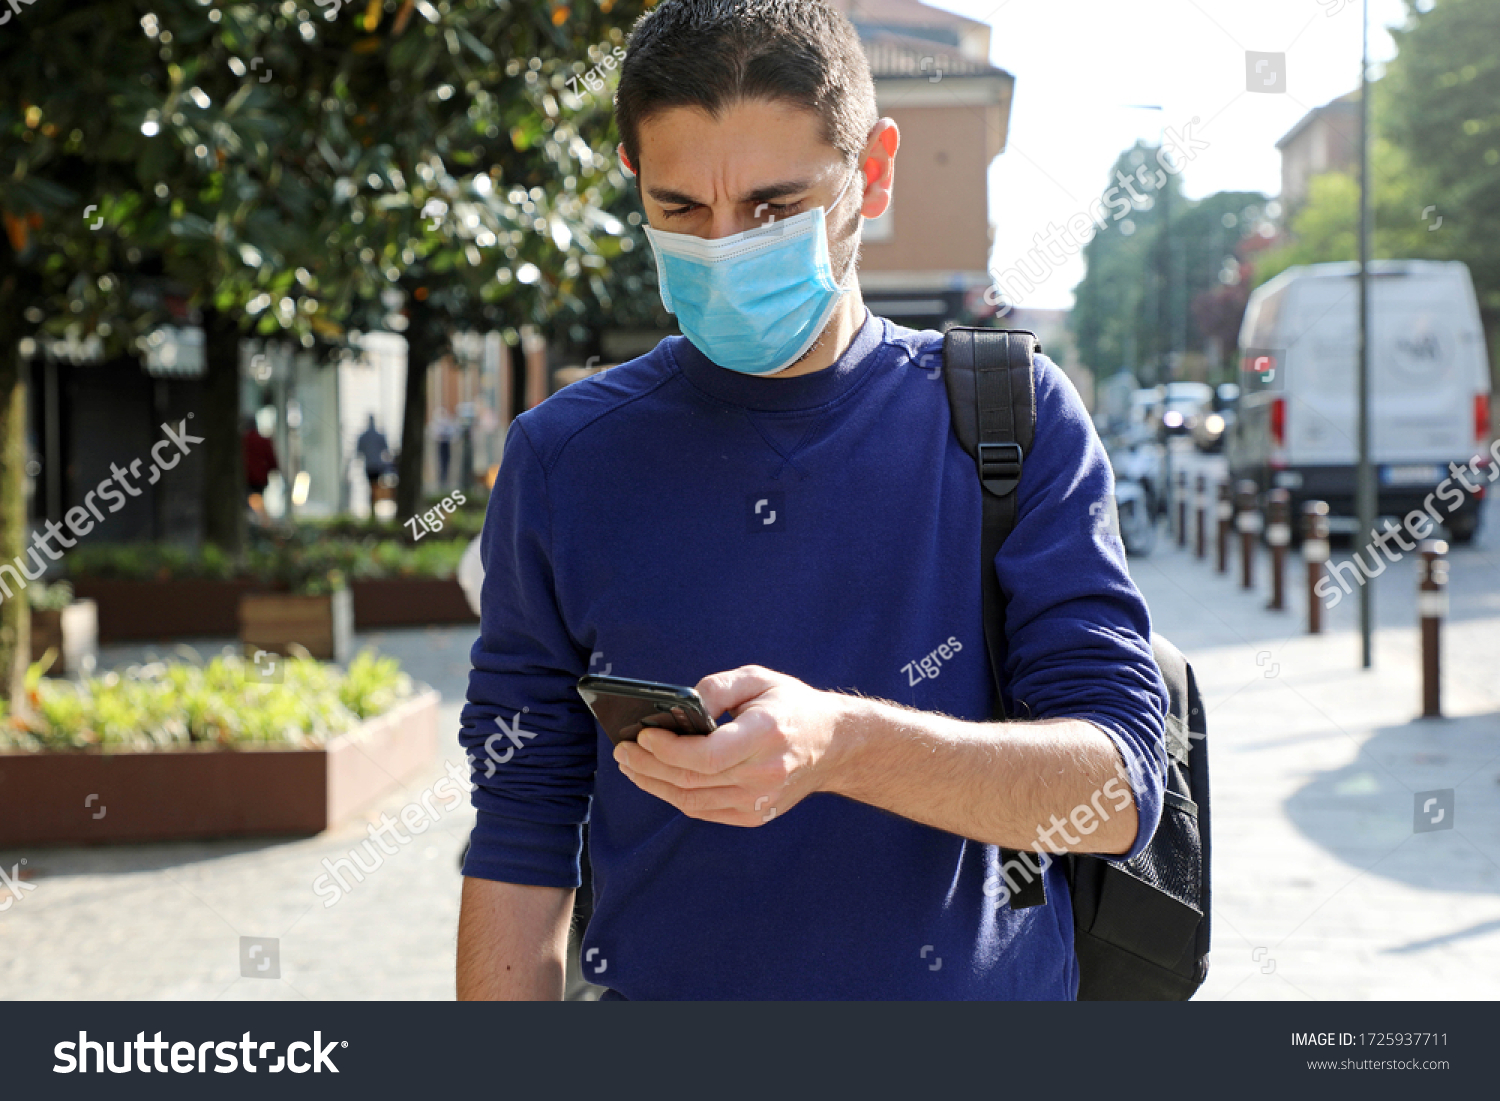 COVID-19 Pandemic Coronavirus Worried Young Man Wearing Surgical Mask Using Smart Phone App in City Street to Aid Contact Tracing and Self Diagnostic in Response to the Coronavirus Pandemic 2019 #1725937711